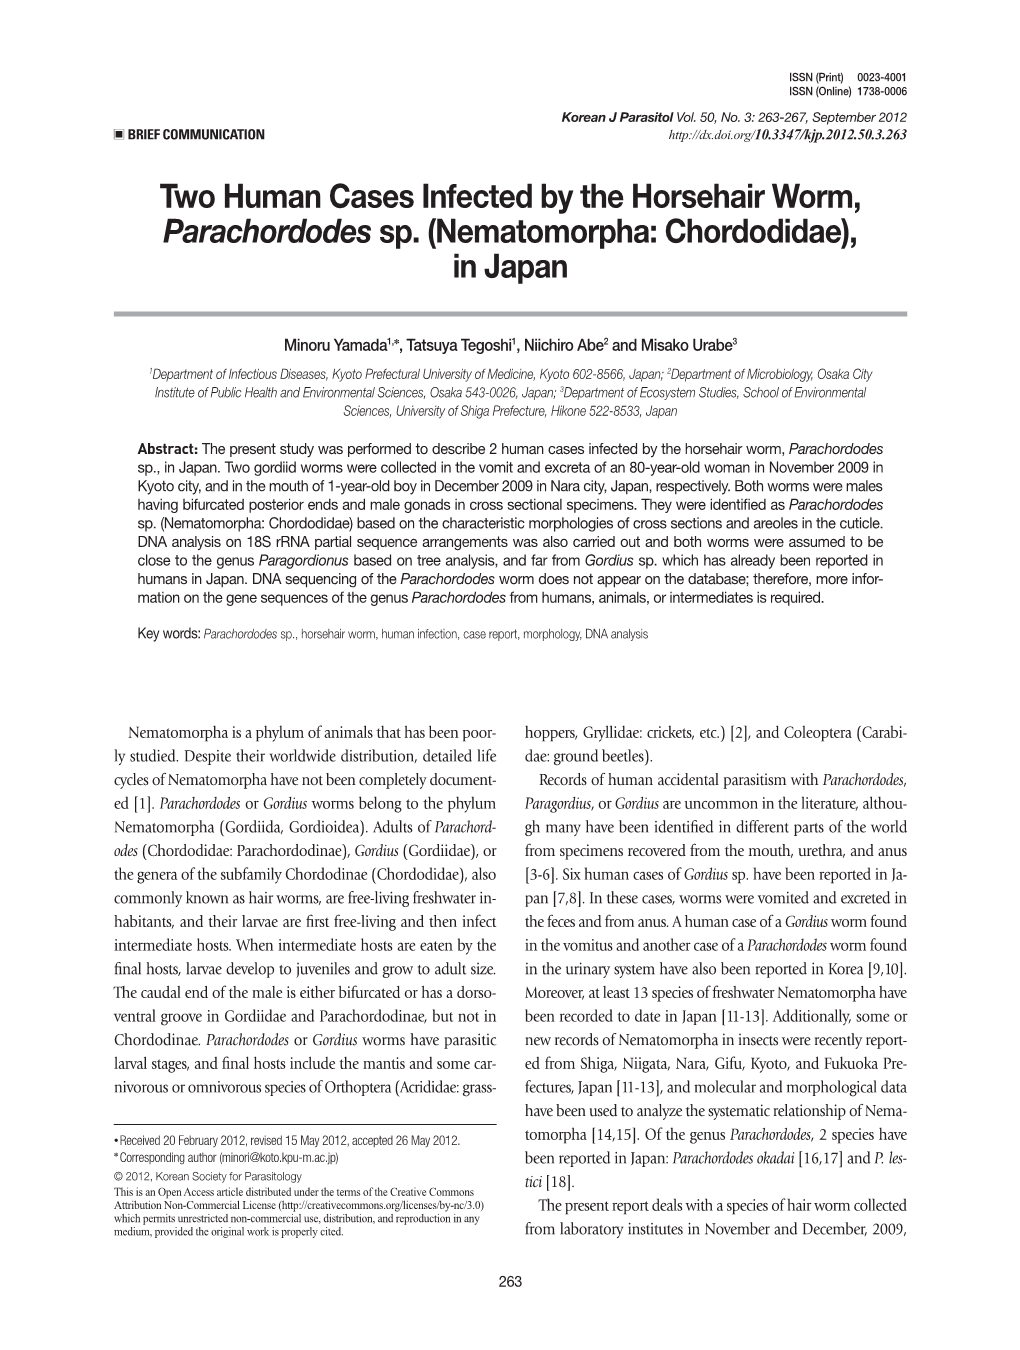 Two Human Cases Infected by the Horsehair Worm, Parachordodes Sp. (Nematomorpha: Chordodidae), in Japan